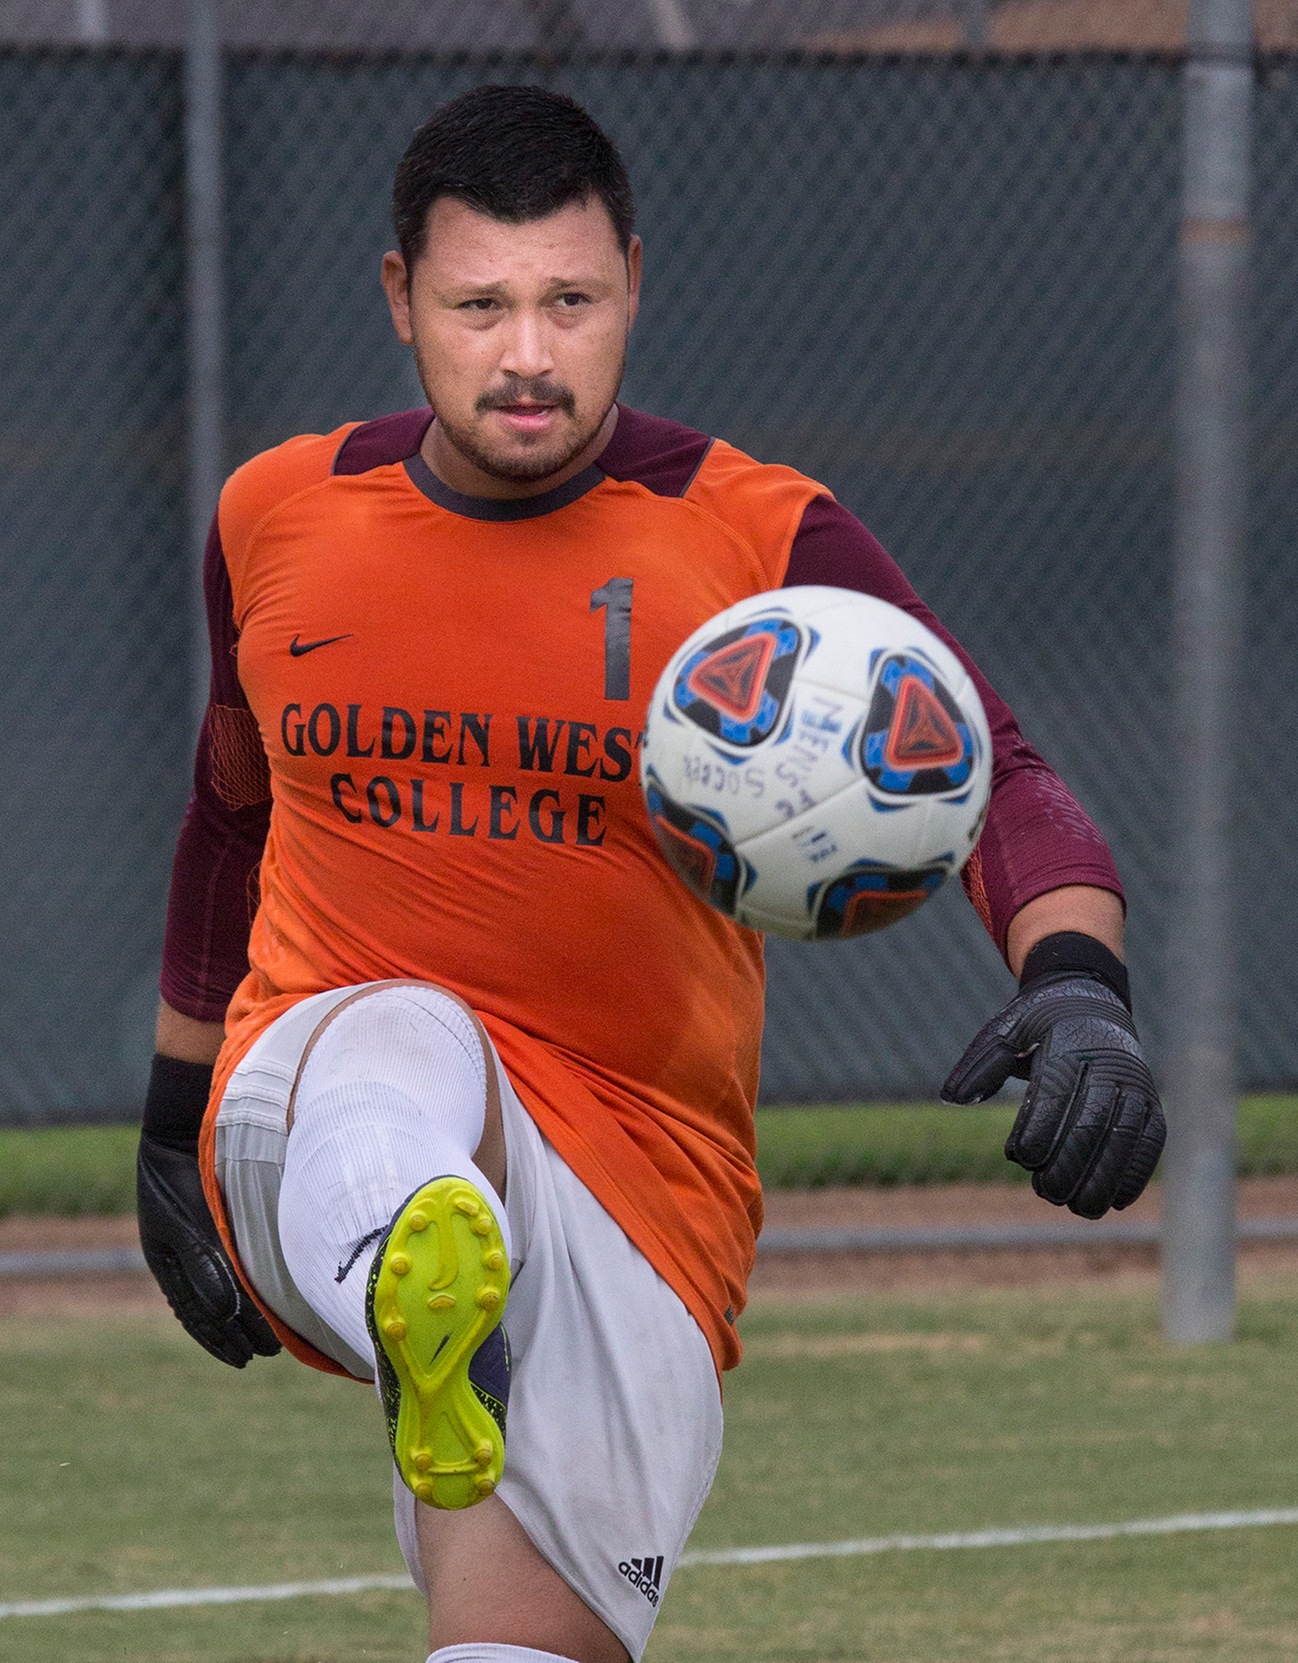 Morales and Juarez Net a Goal in Win